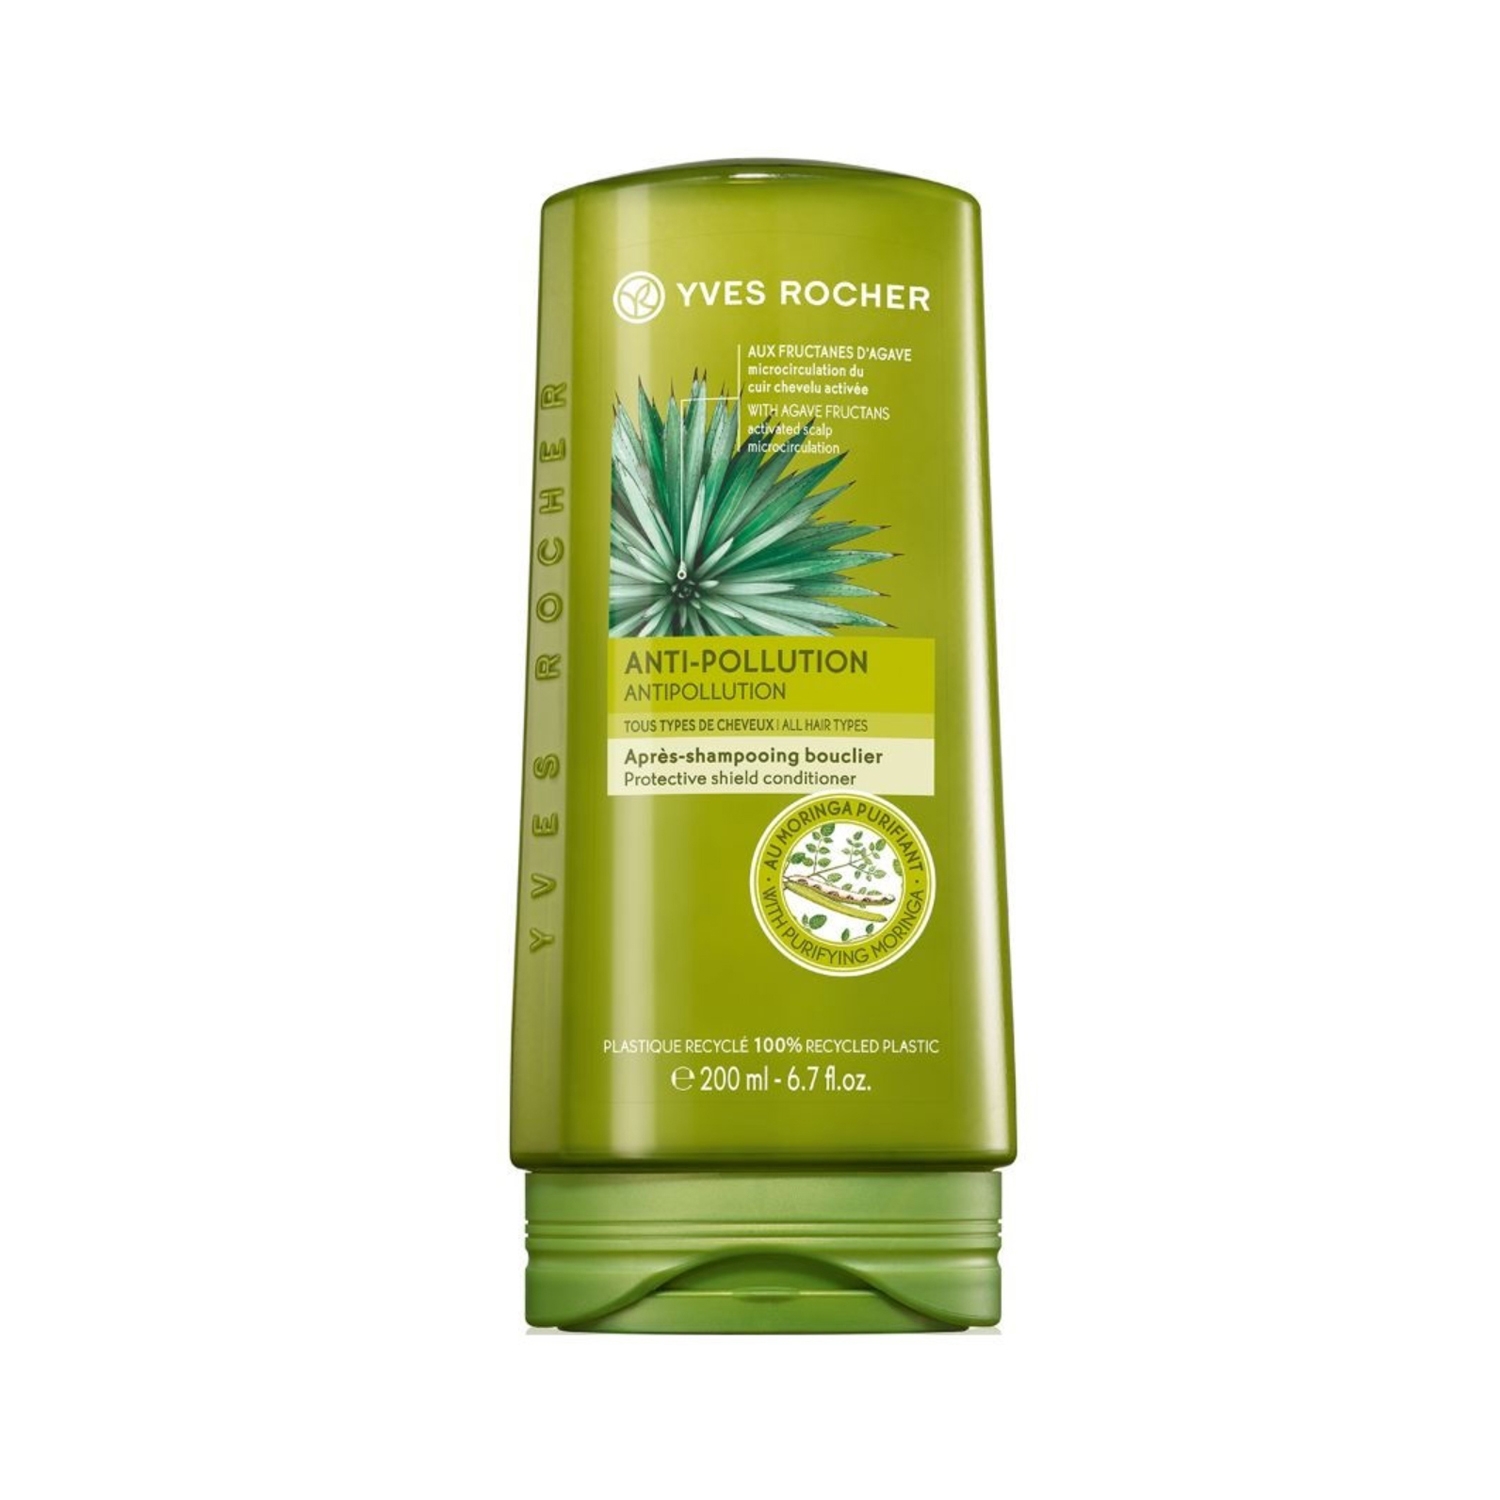 Yves Rocher | Yves Rocher Anti-Pollution Protective Shield Conditioner (200ml)